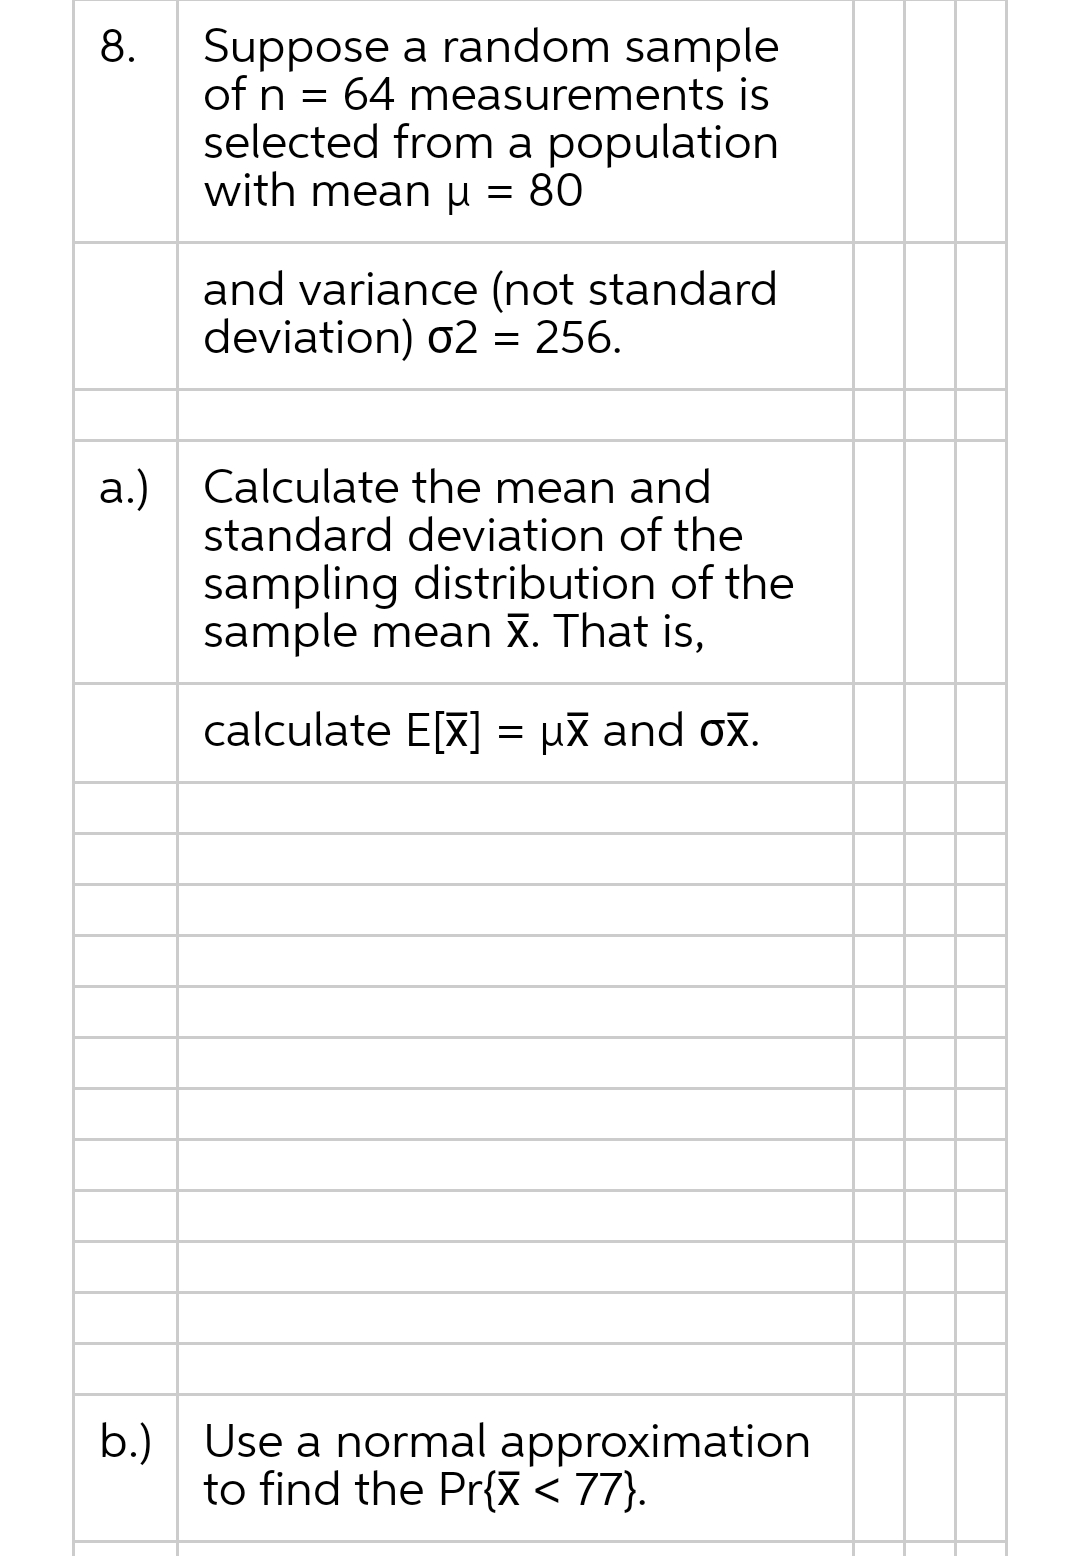 Suppose a random sample
of n = 64 measurements is
selected from a population
with mean µ = 80
and variance (not standard
deviation) 02 = 256.
a.) Calculate the mean and
standard deviation of the
sampling distribution of the
sample mean X. That is,
calculate E[X] = μx and ox.
b.) Use a normal approximation
to find the Pr{X < 77}.
8.